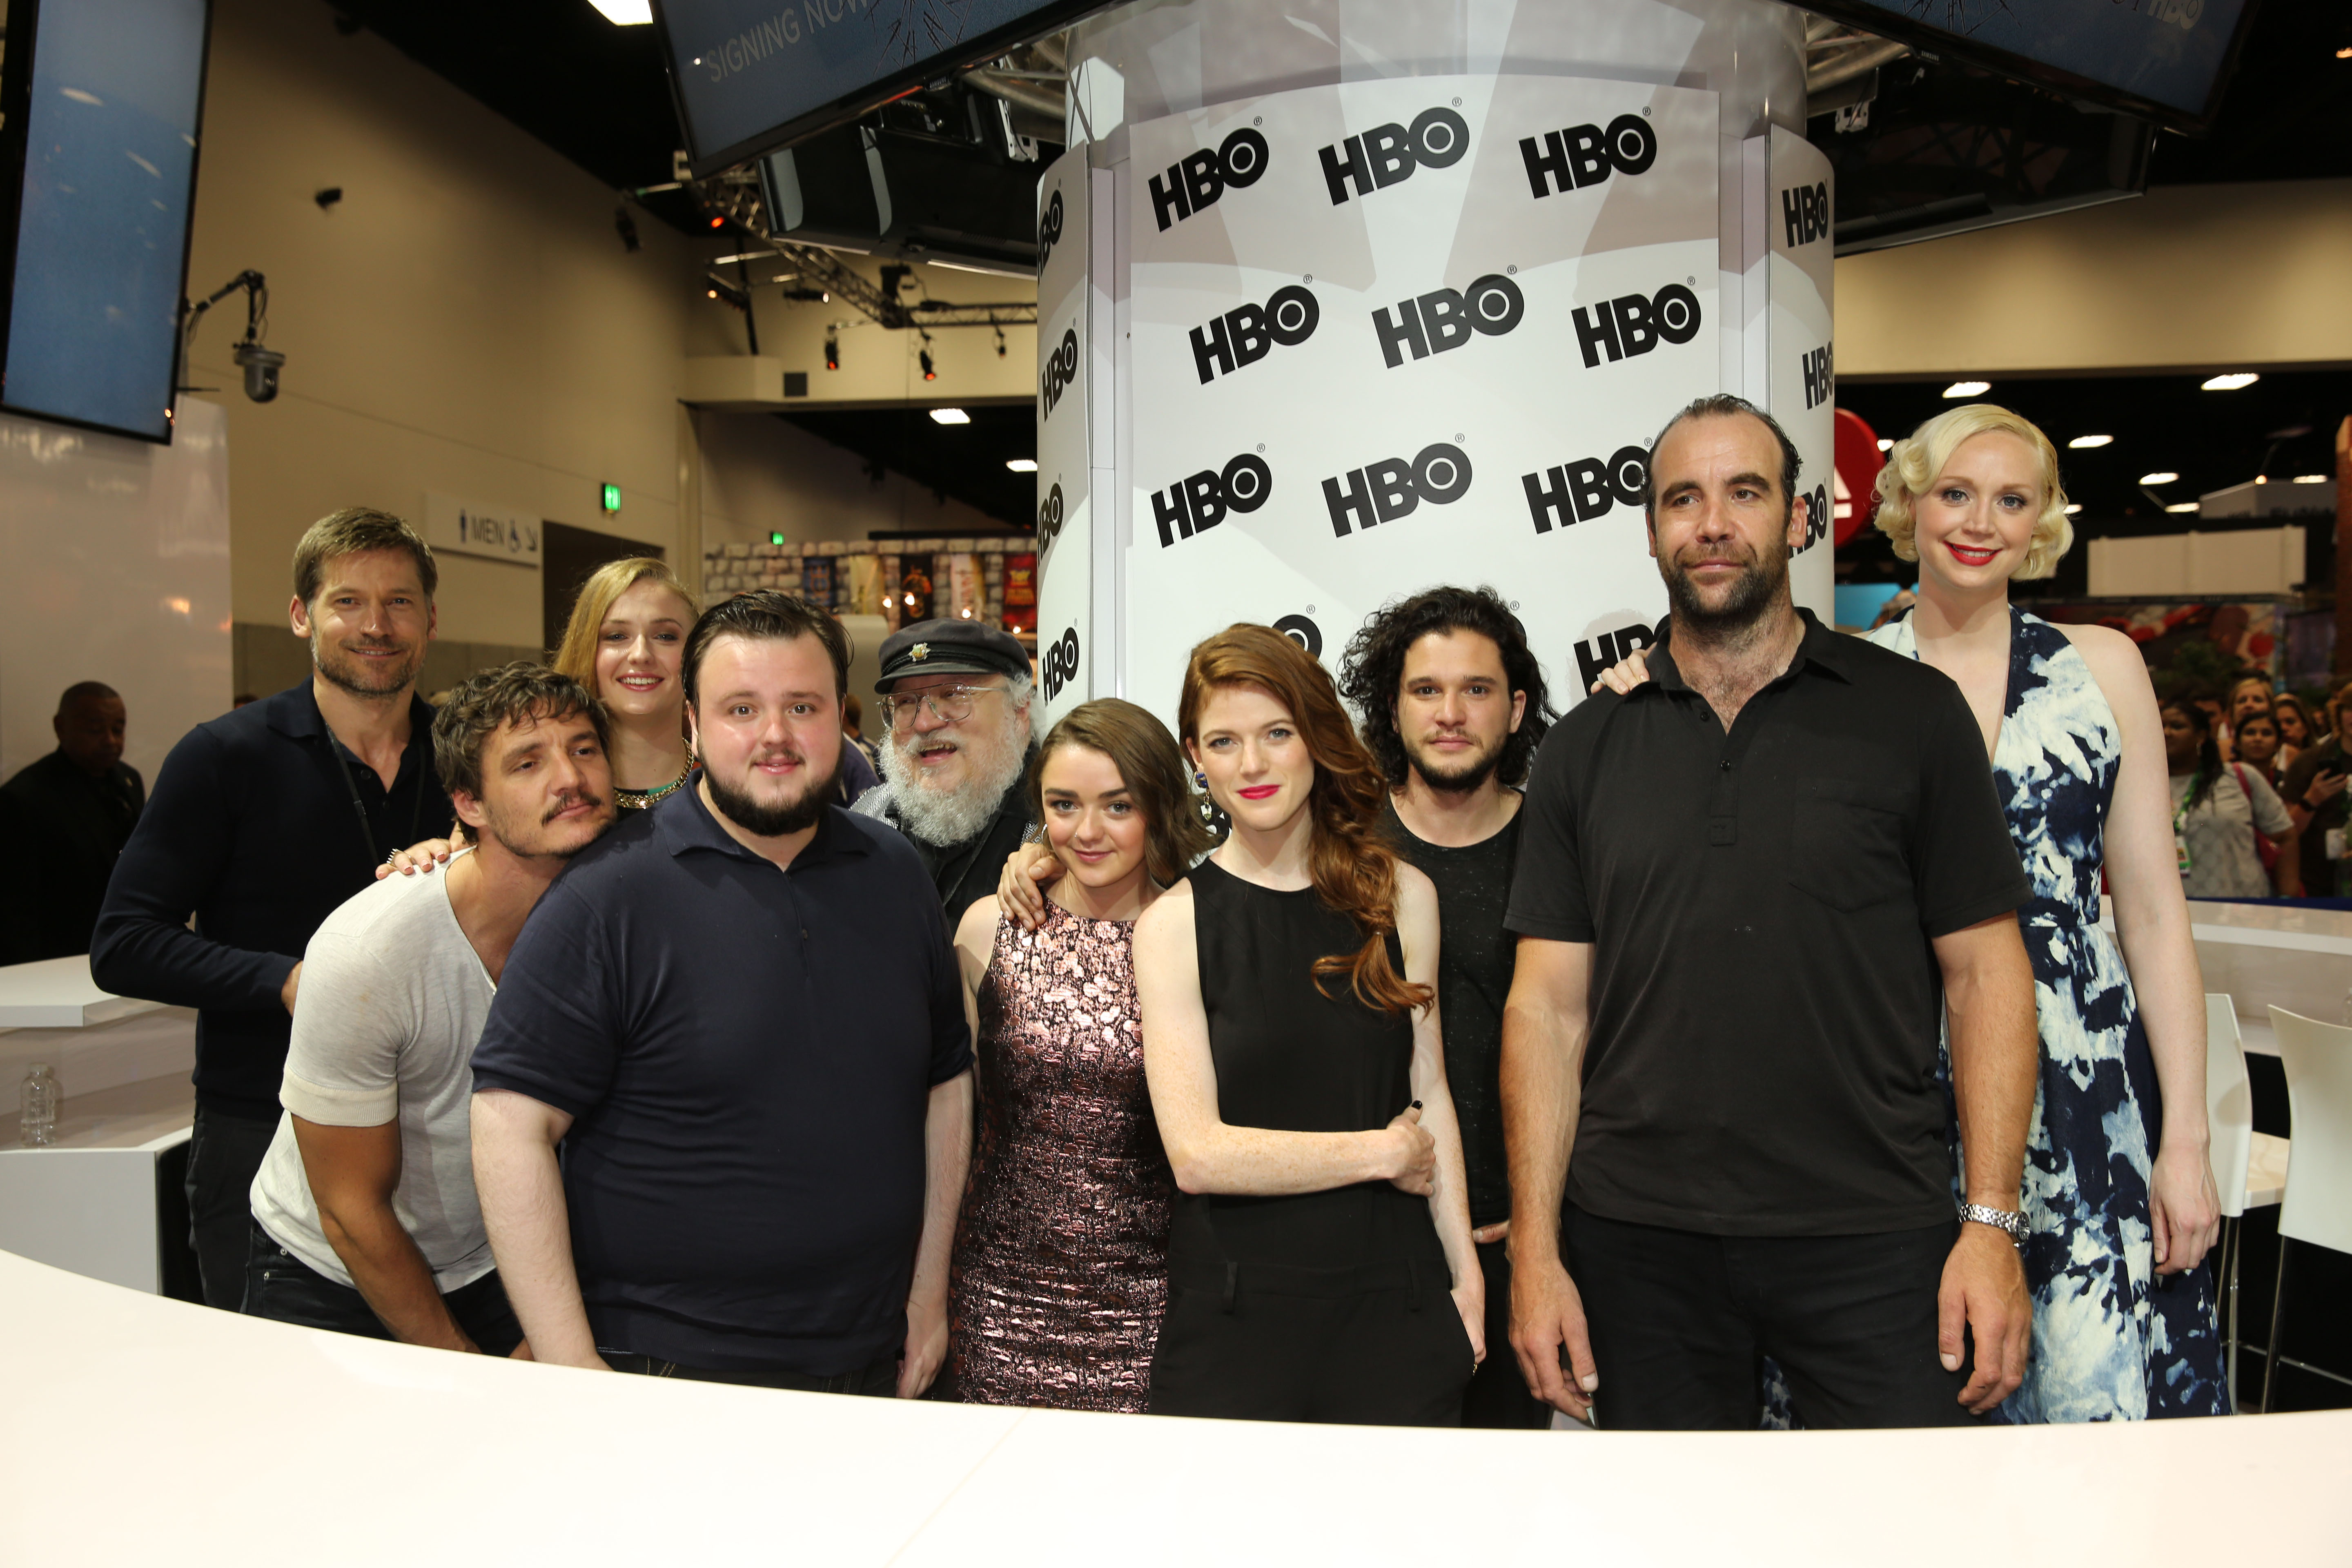 GAME OF THRONES at Comic-Con